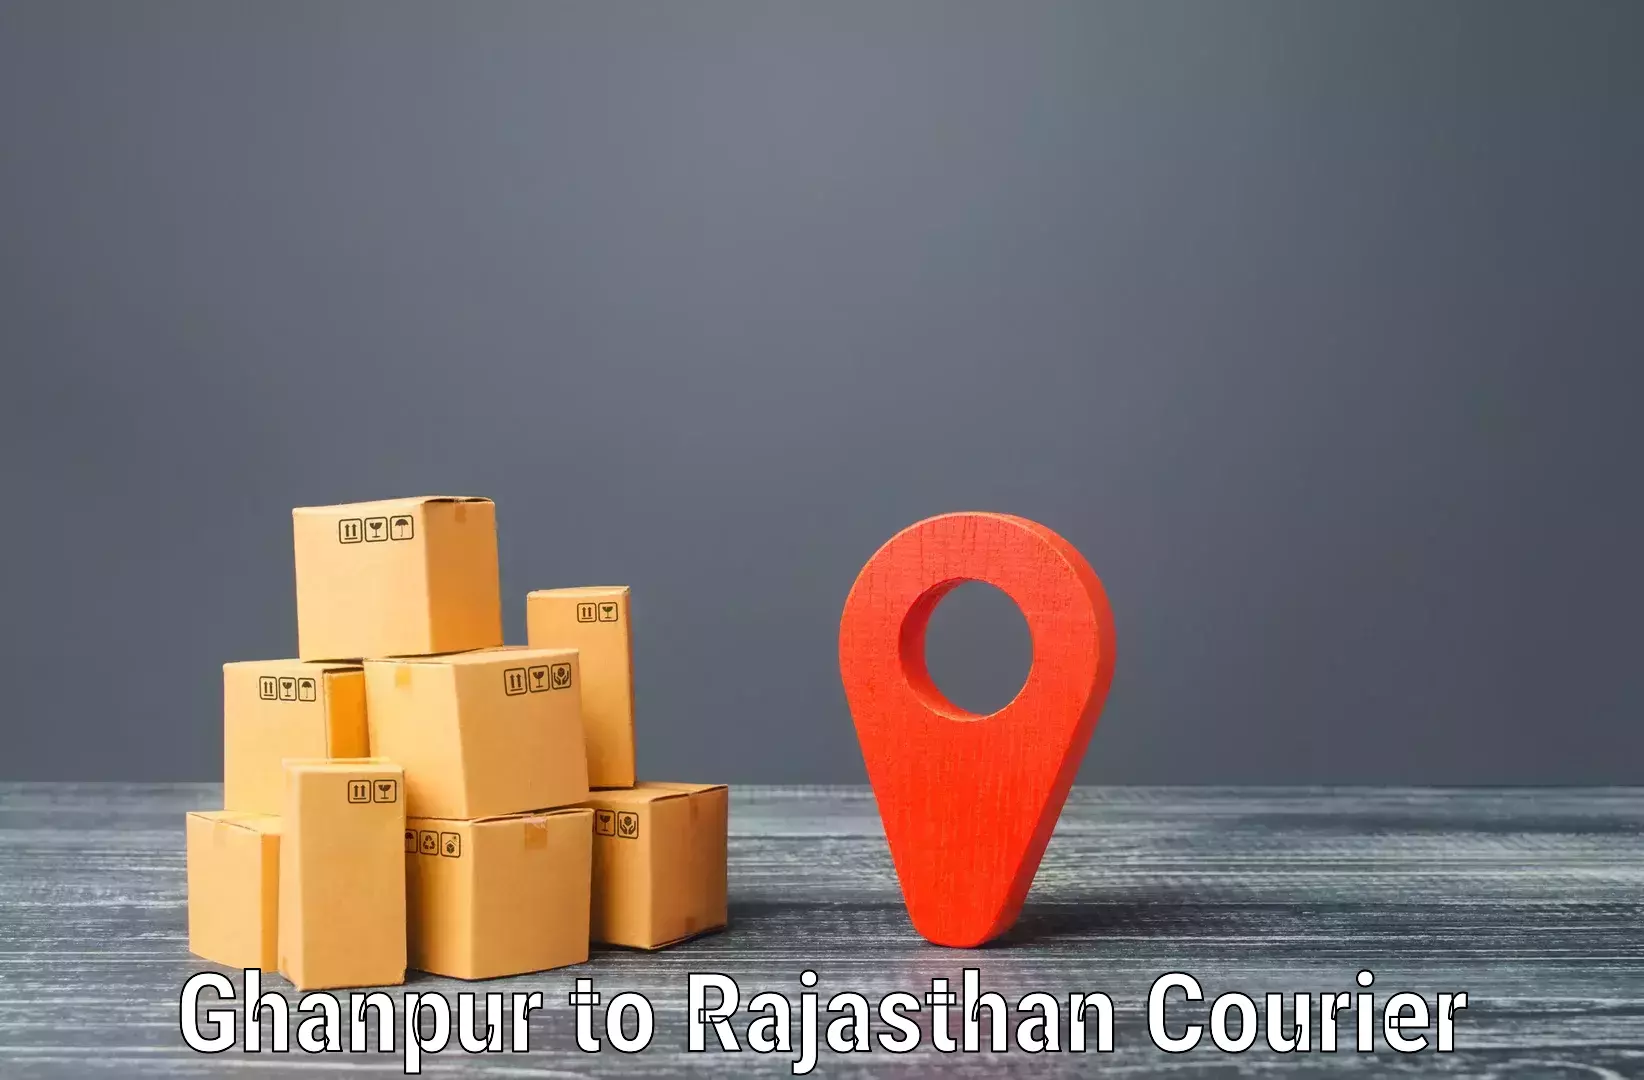 Courier service innovation in Ghanpur to Balaran